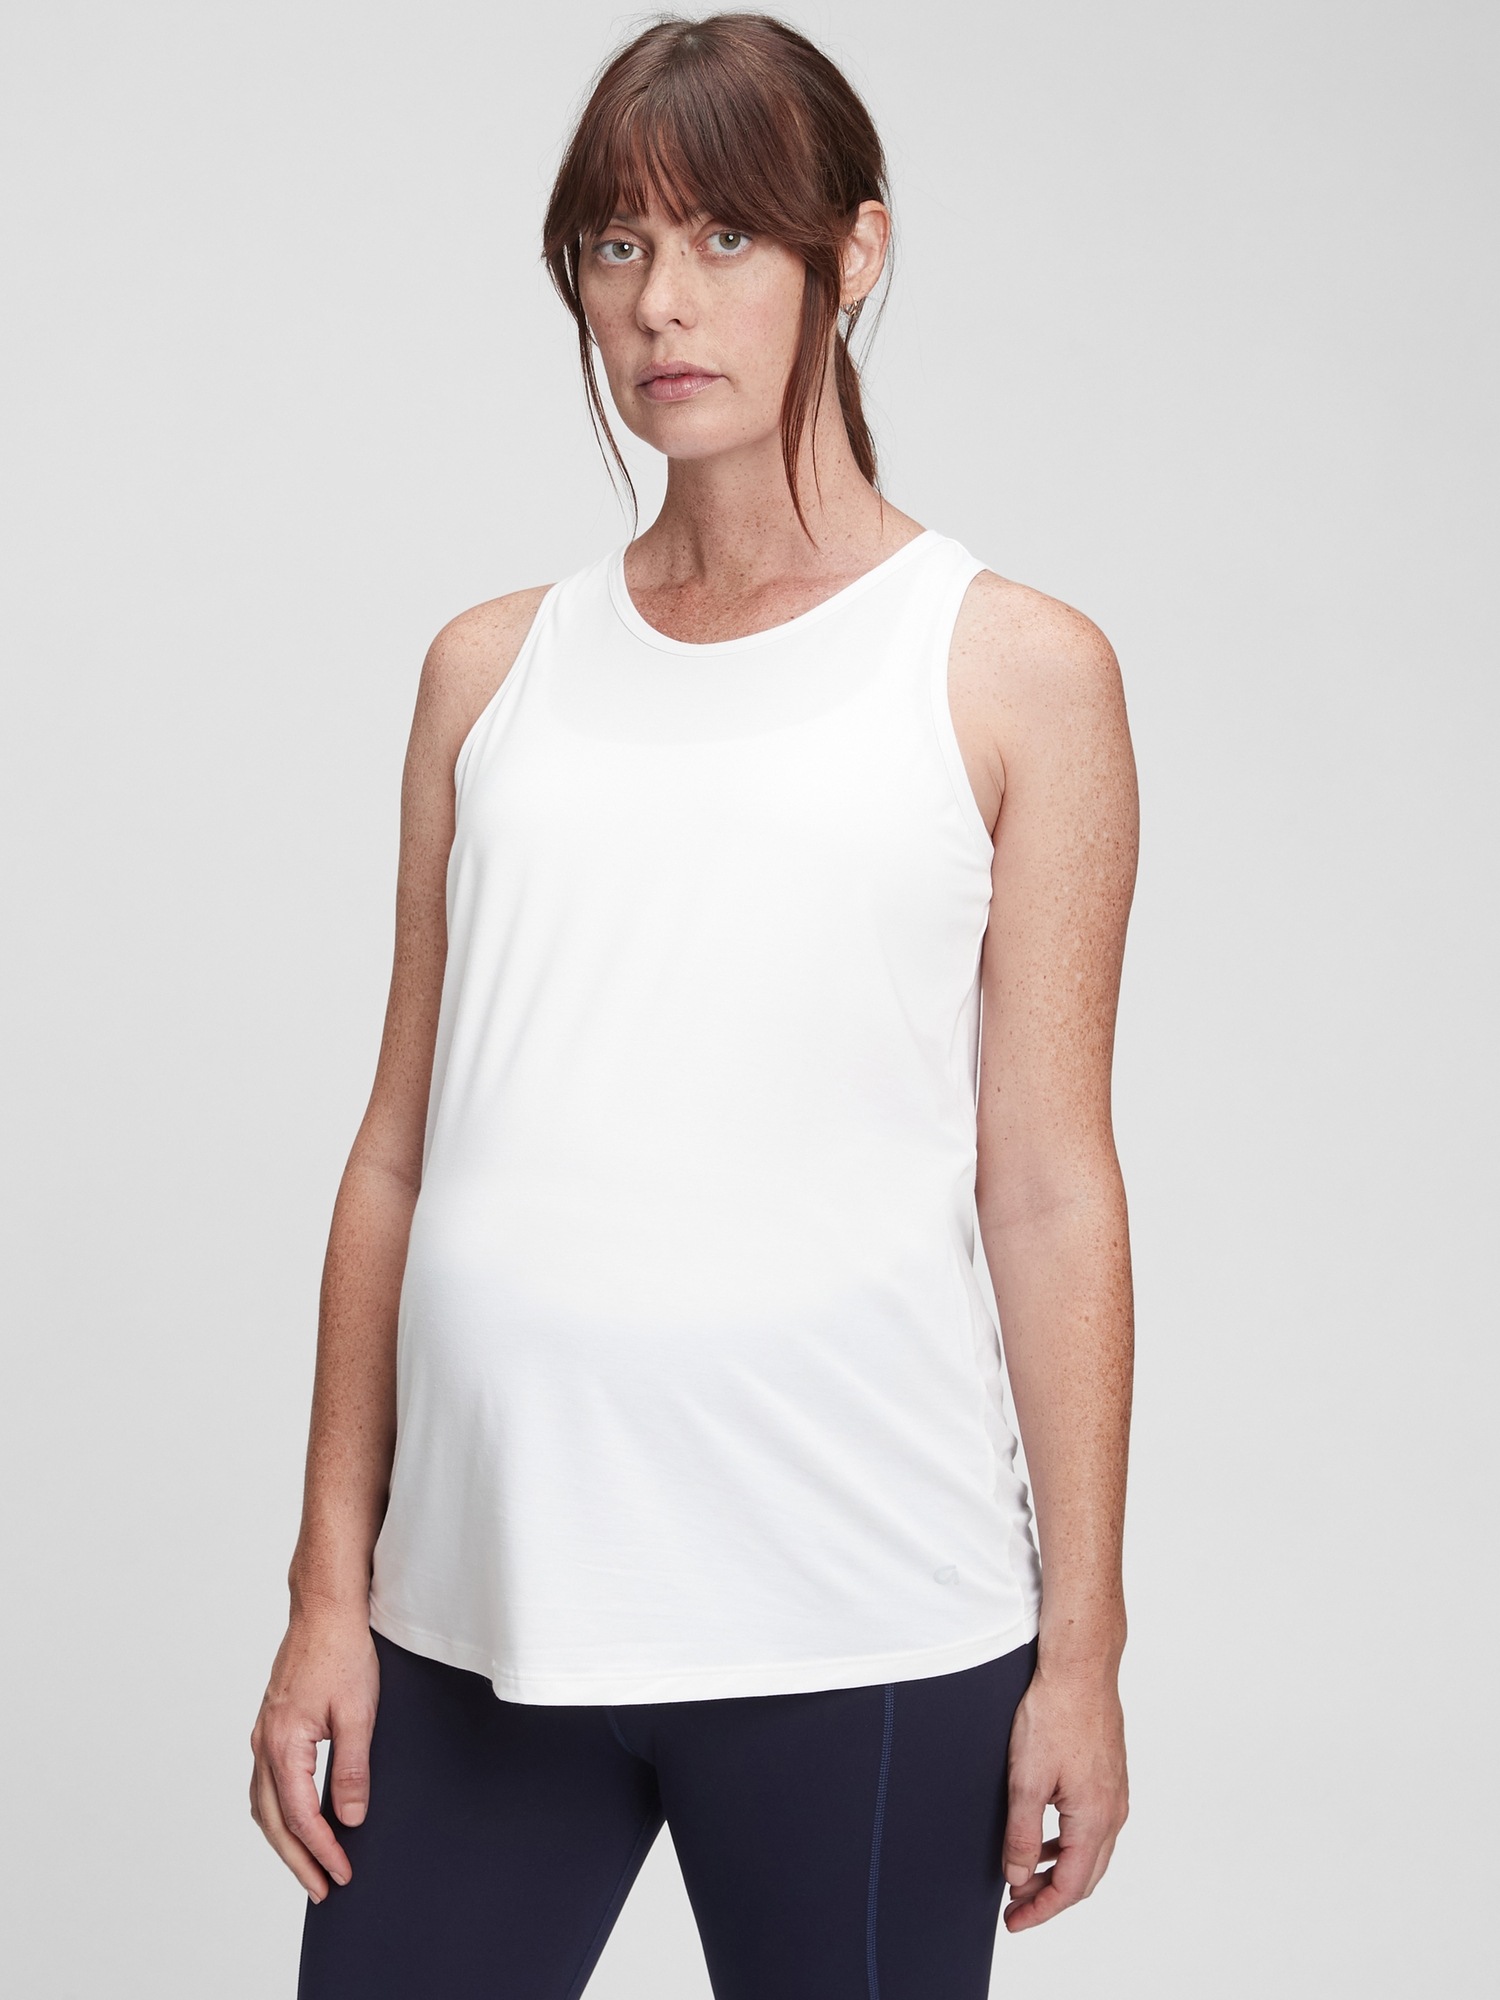 Gap Fit Maternity Maternity Clothing On Sale Up To 90% Off Retail